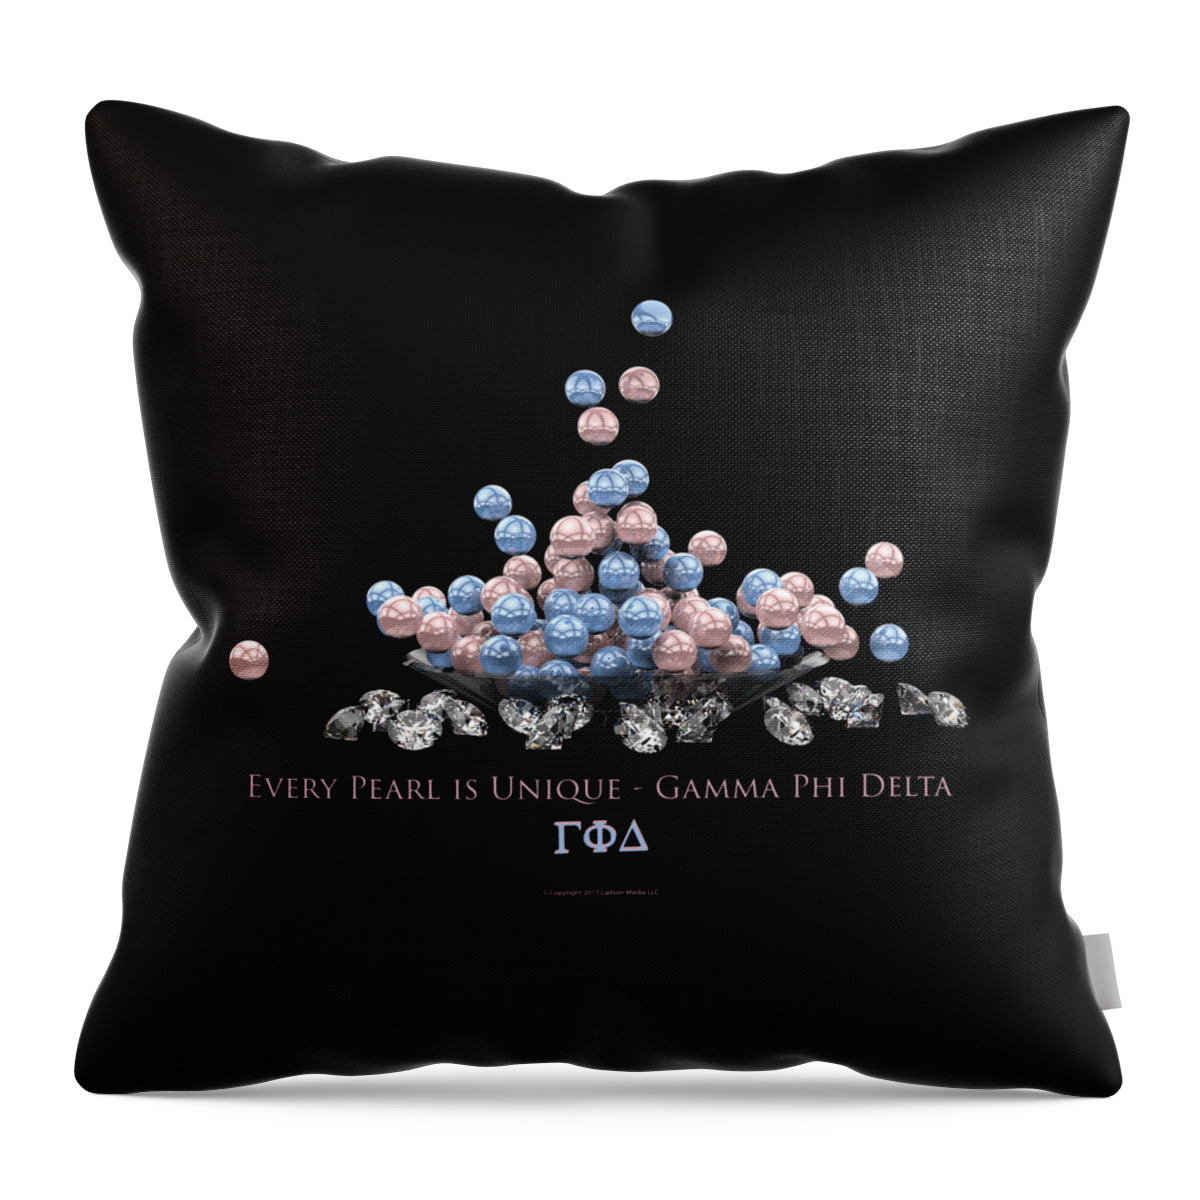 Gamma Phi Delta Pearls Throw Pillow featuring the digital art The Pearls of Gamma Phi Delta by William Ladson